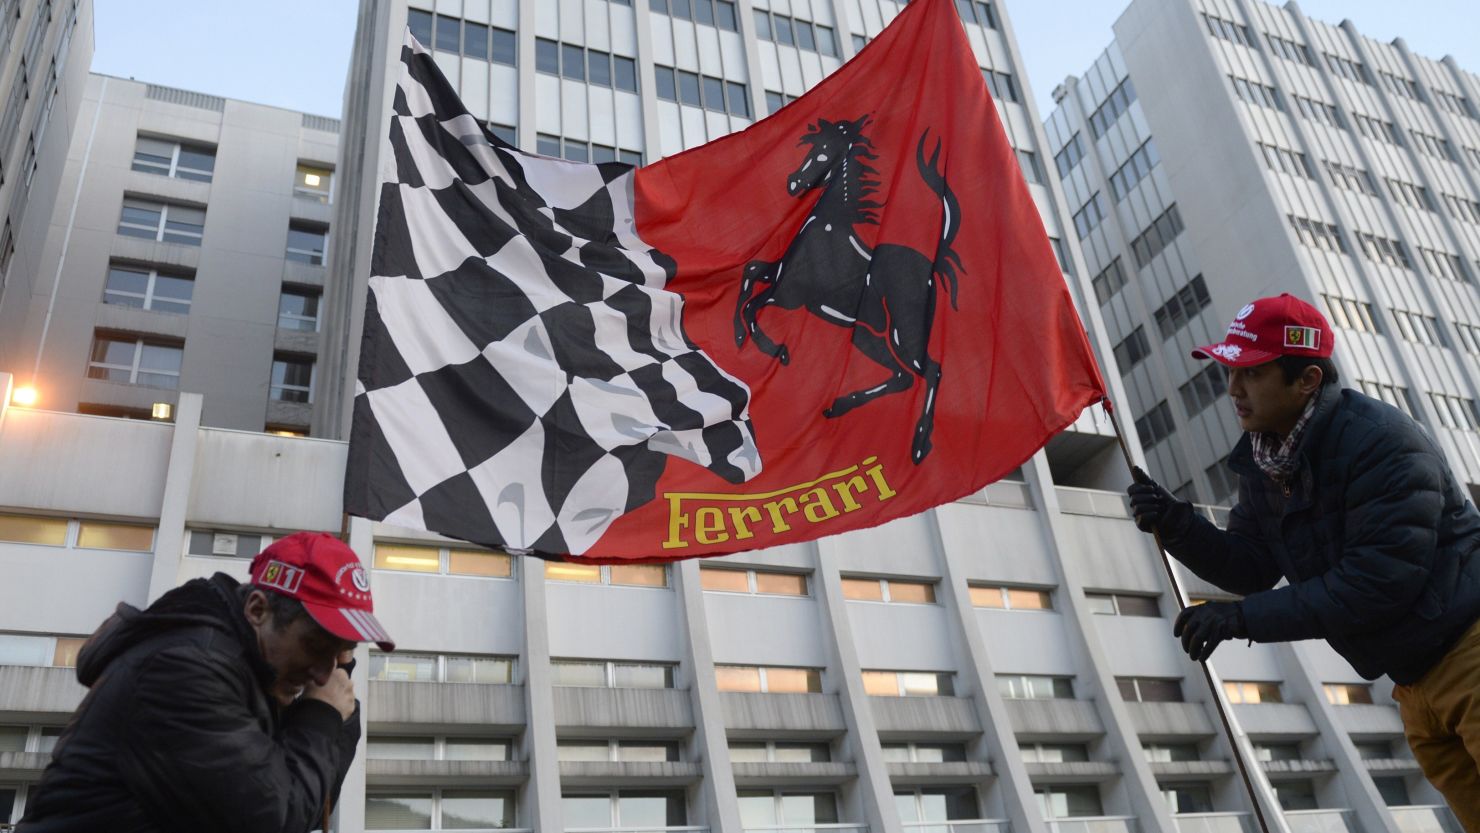 Fans hold a Ferrari flag Tuesday in front of the Grenoble University Hospital Center.